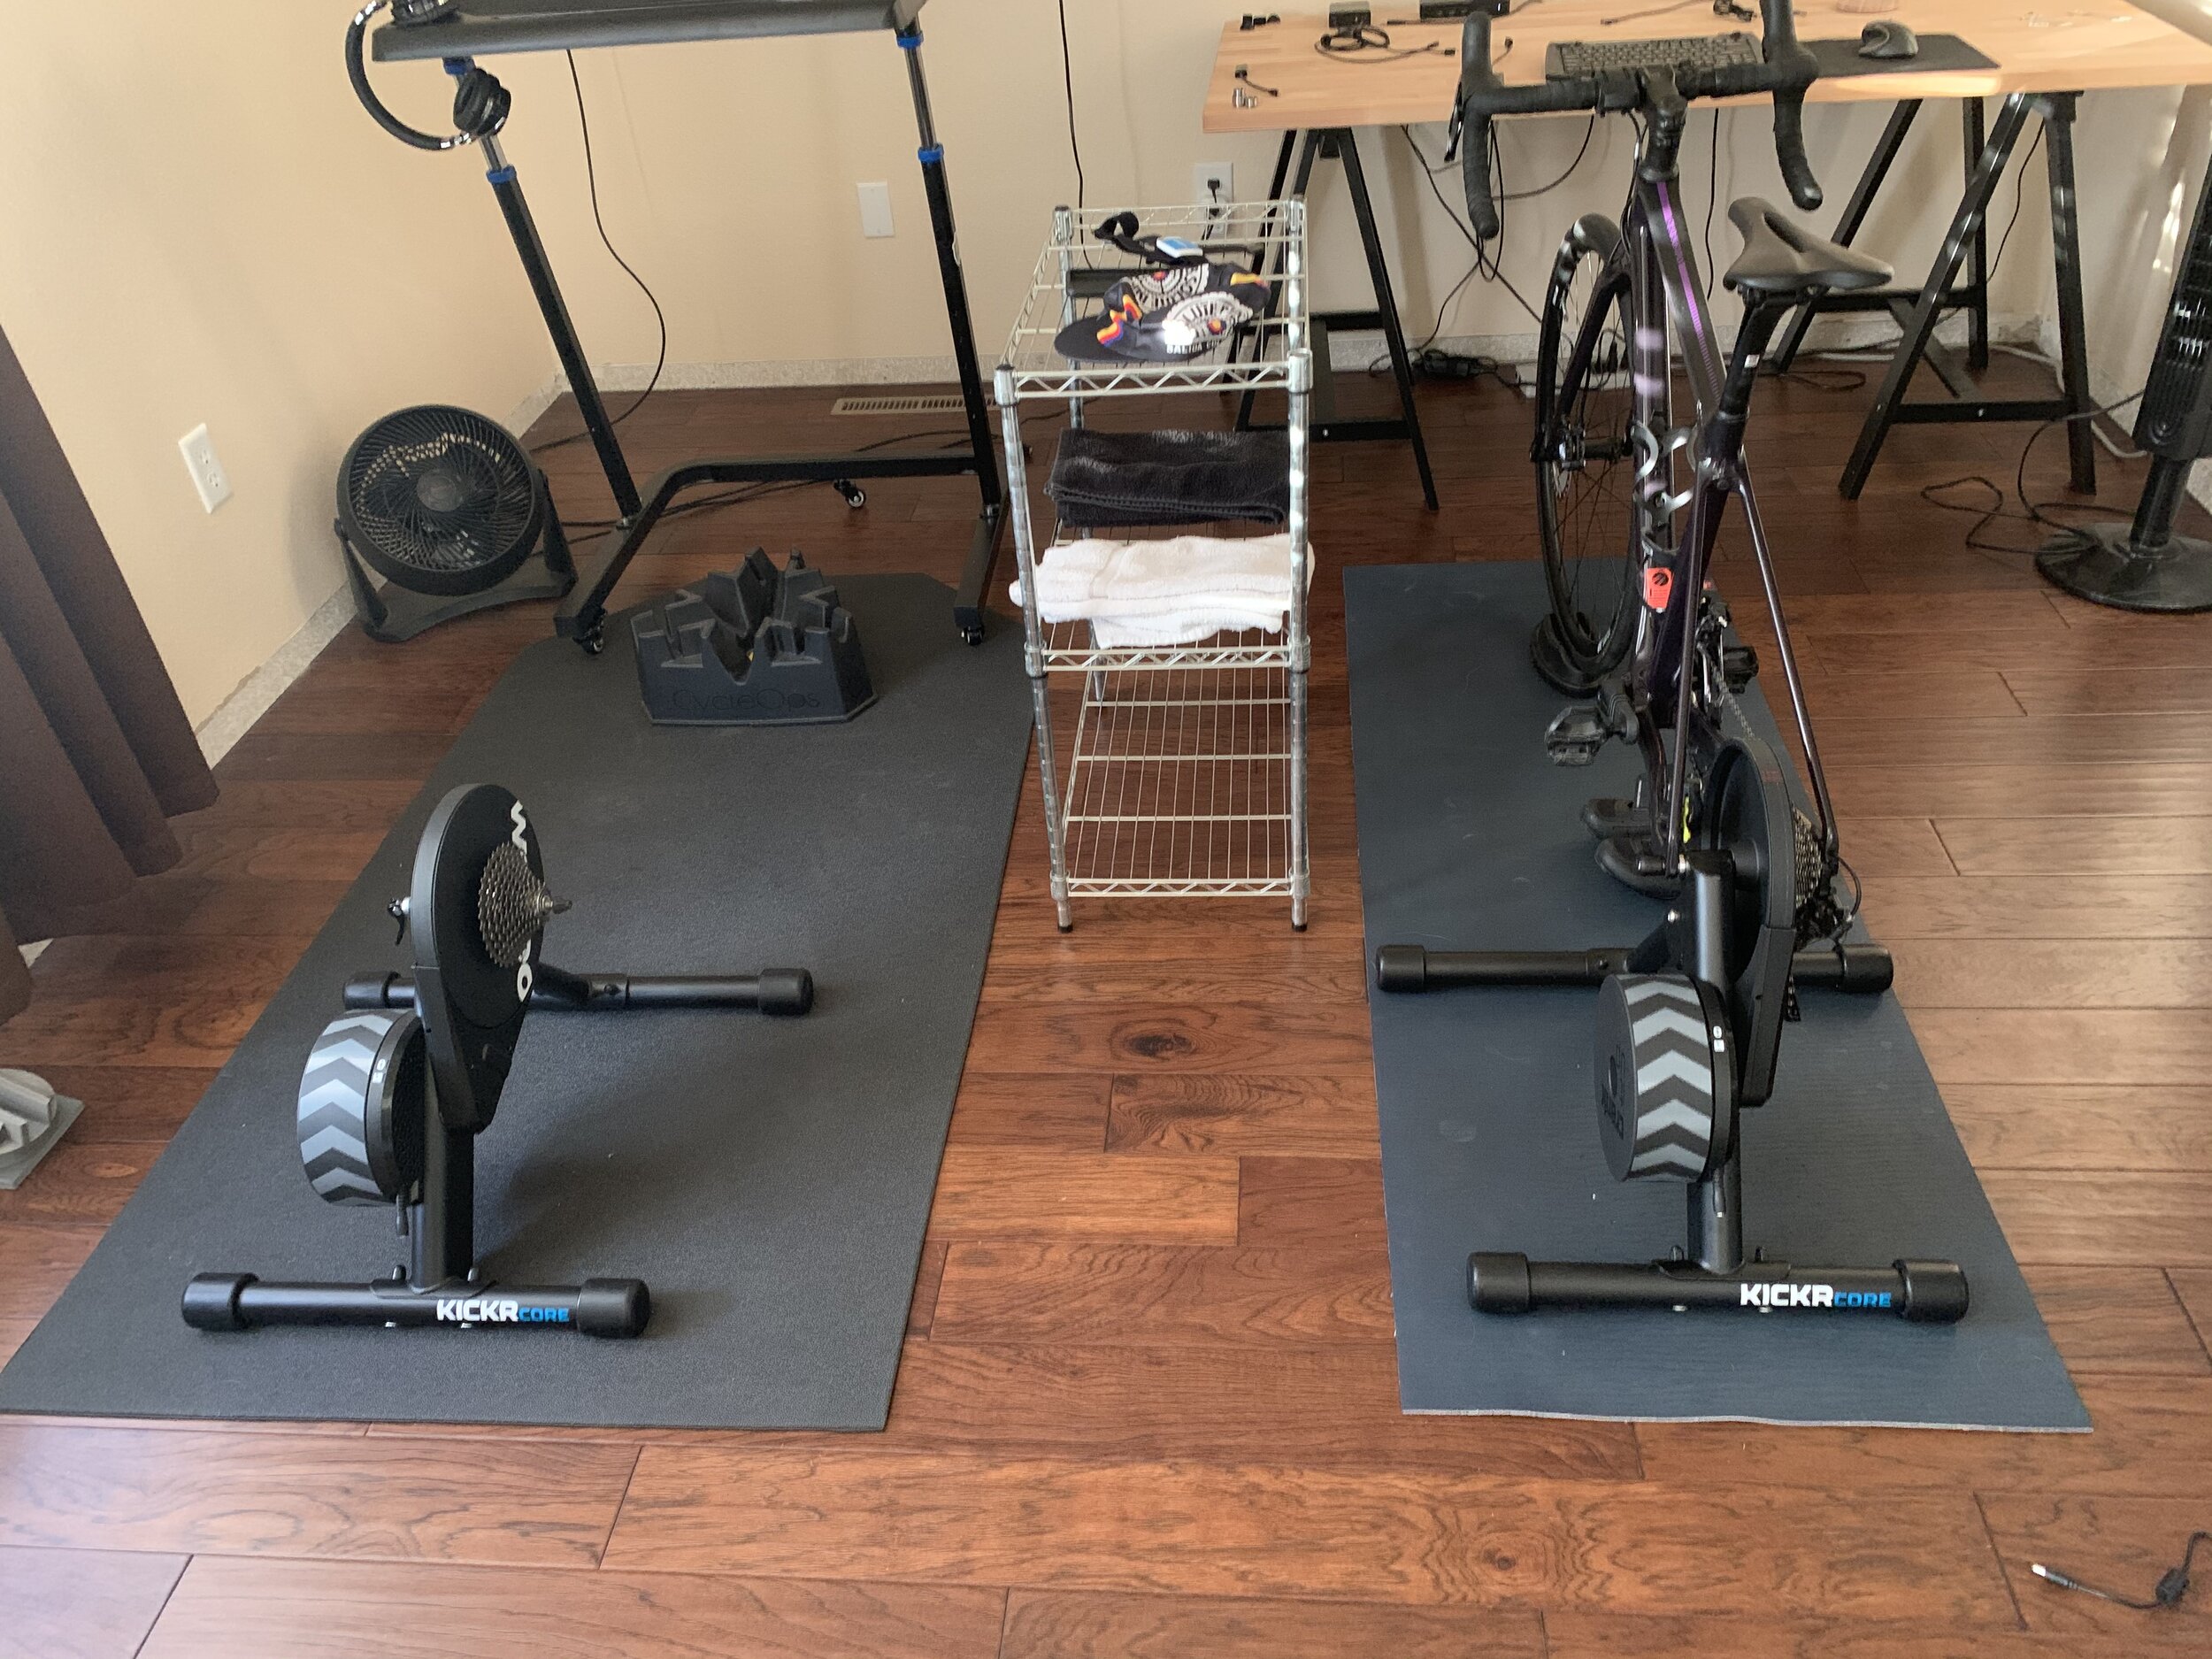 Our pain cave